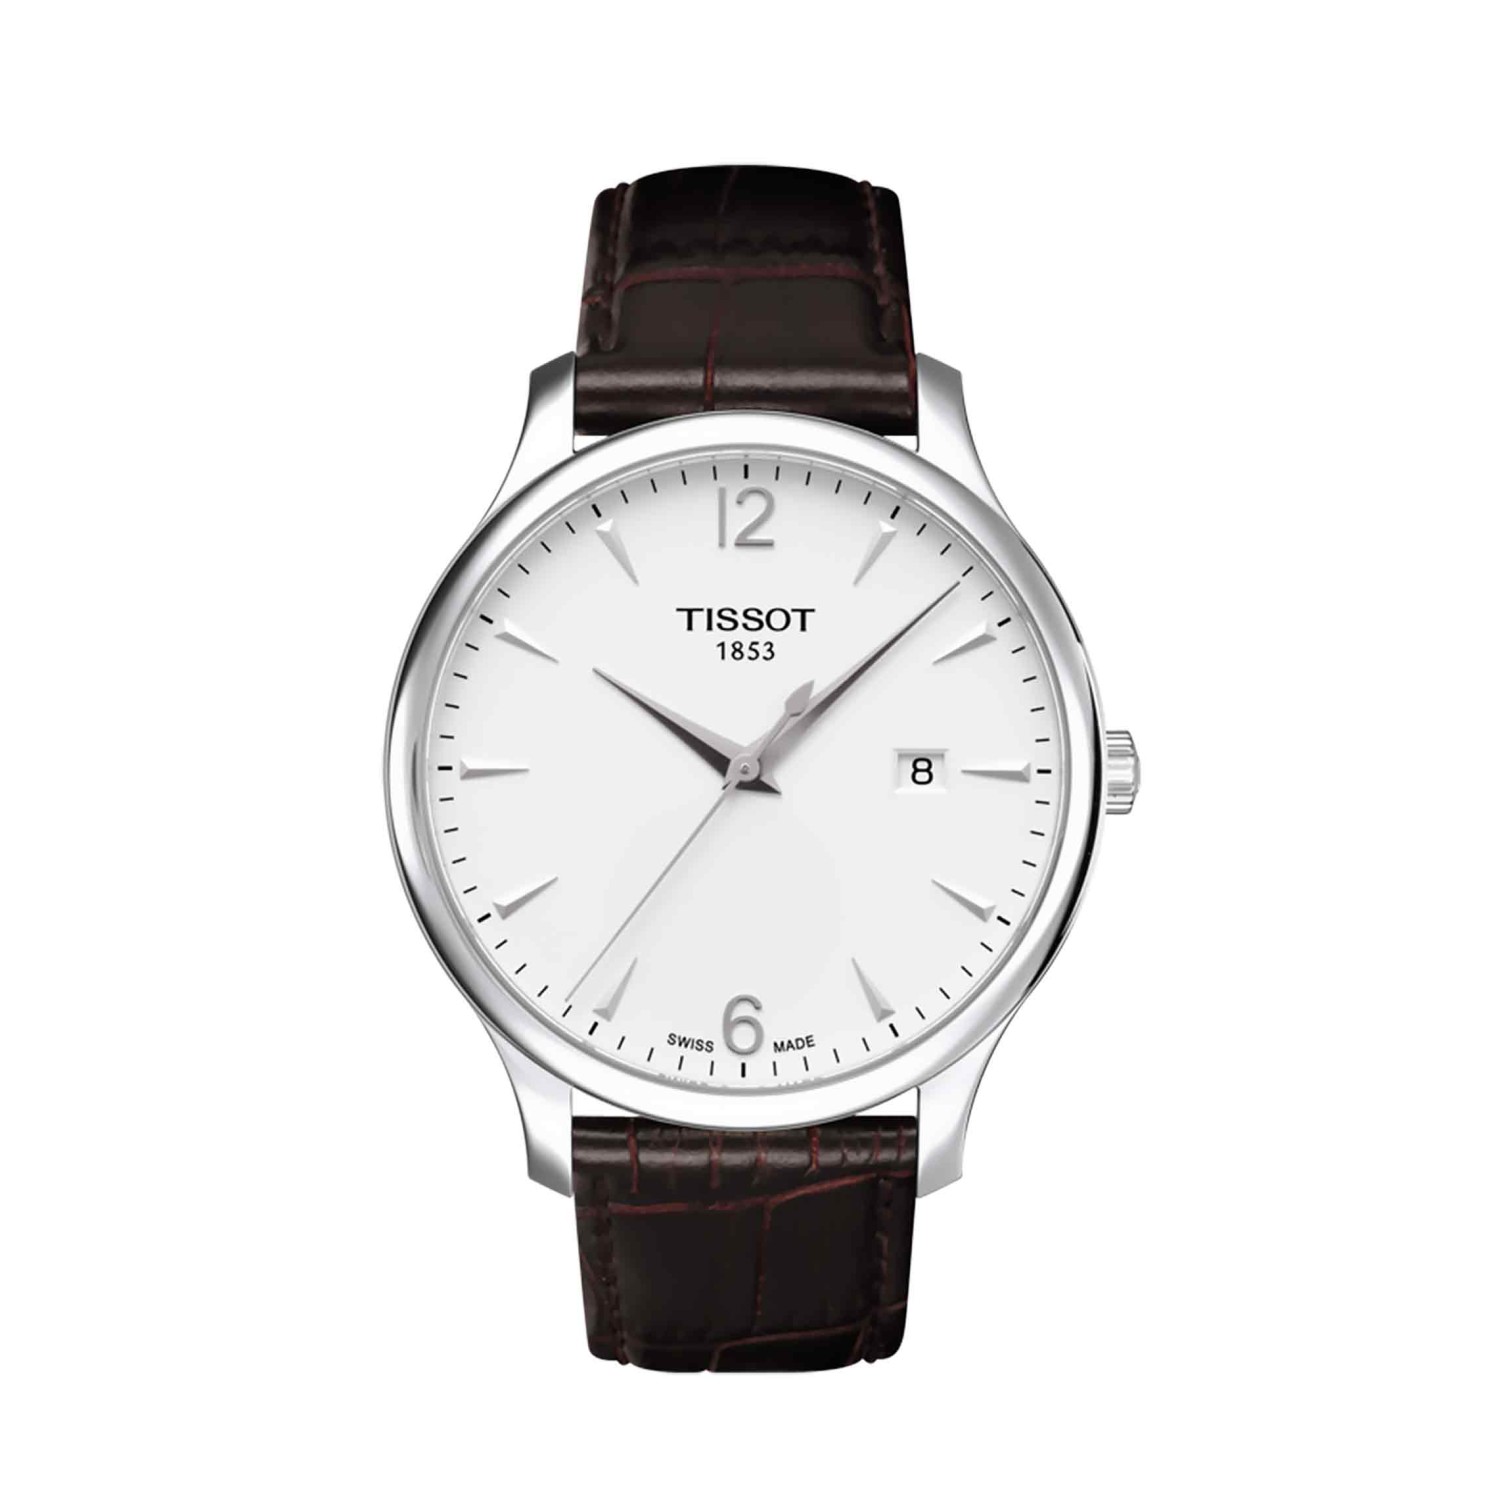 TISSOT T-Classic Tradition  T063.610.16.037.00. The Tissot Tradition family gives ultra-modern watchmaking a justified hint of nostalgia, giving today’s technology a vintage-style design signature. High-tech operation is perfectly balanced with c